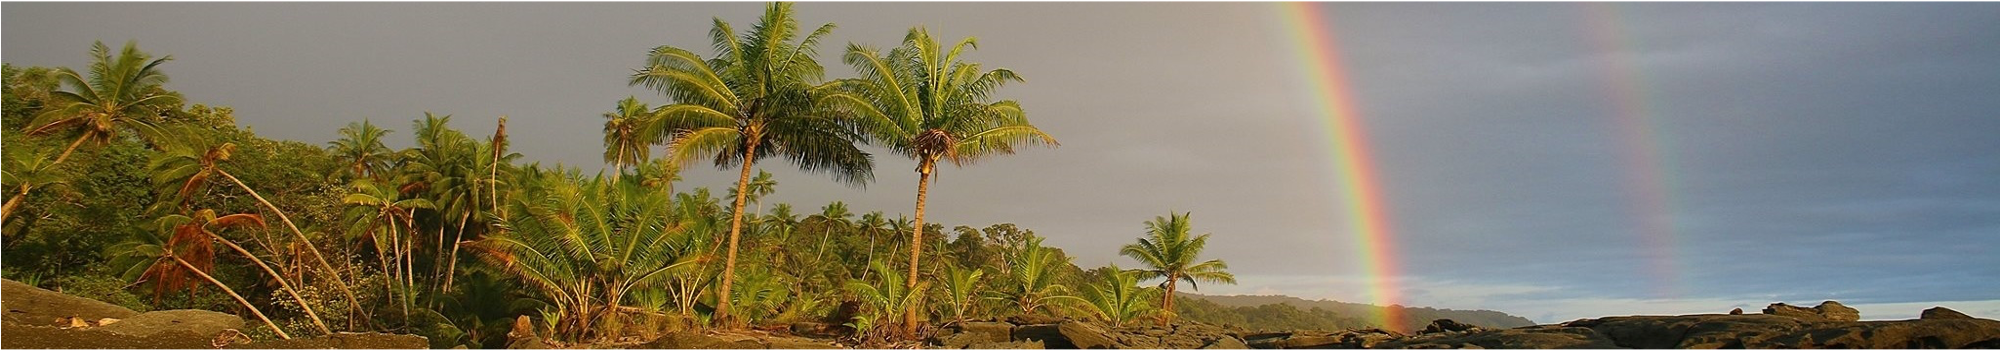 View of the coastal landscape of the Osa Peninsula with overhead rainbows. Image credit: Osa Conservation (https://osaconservation.org/)